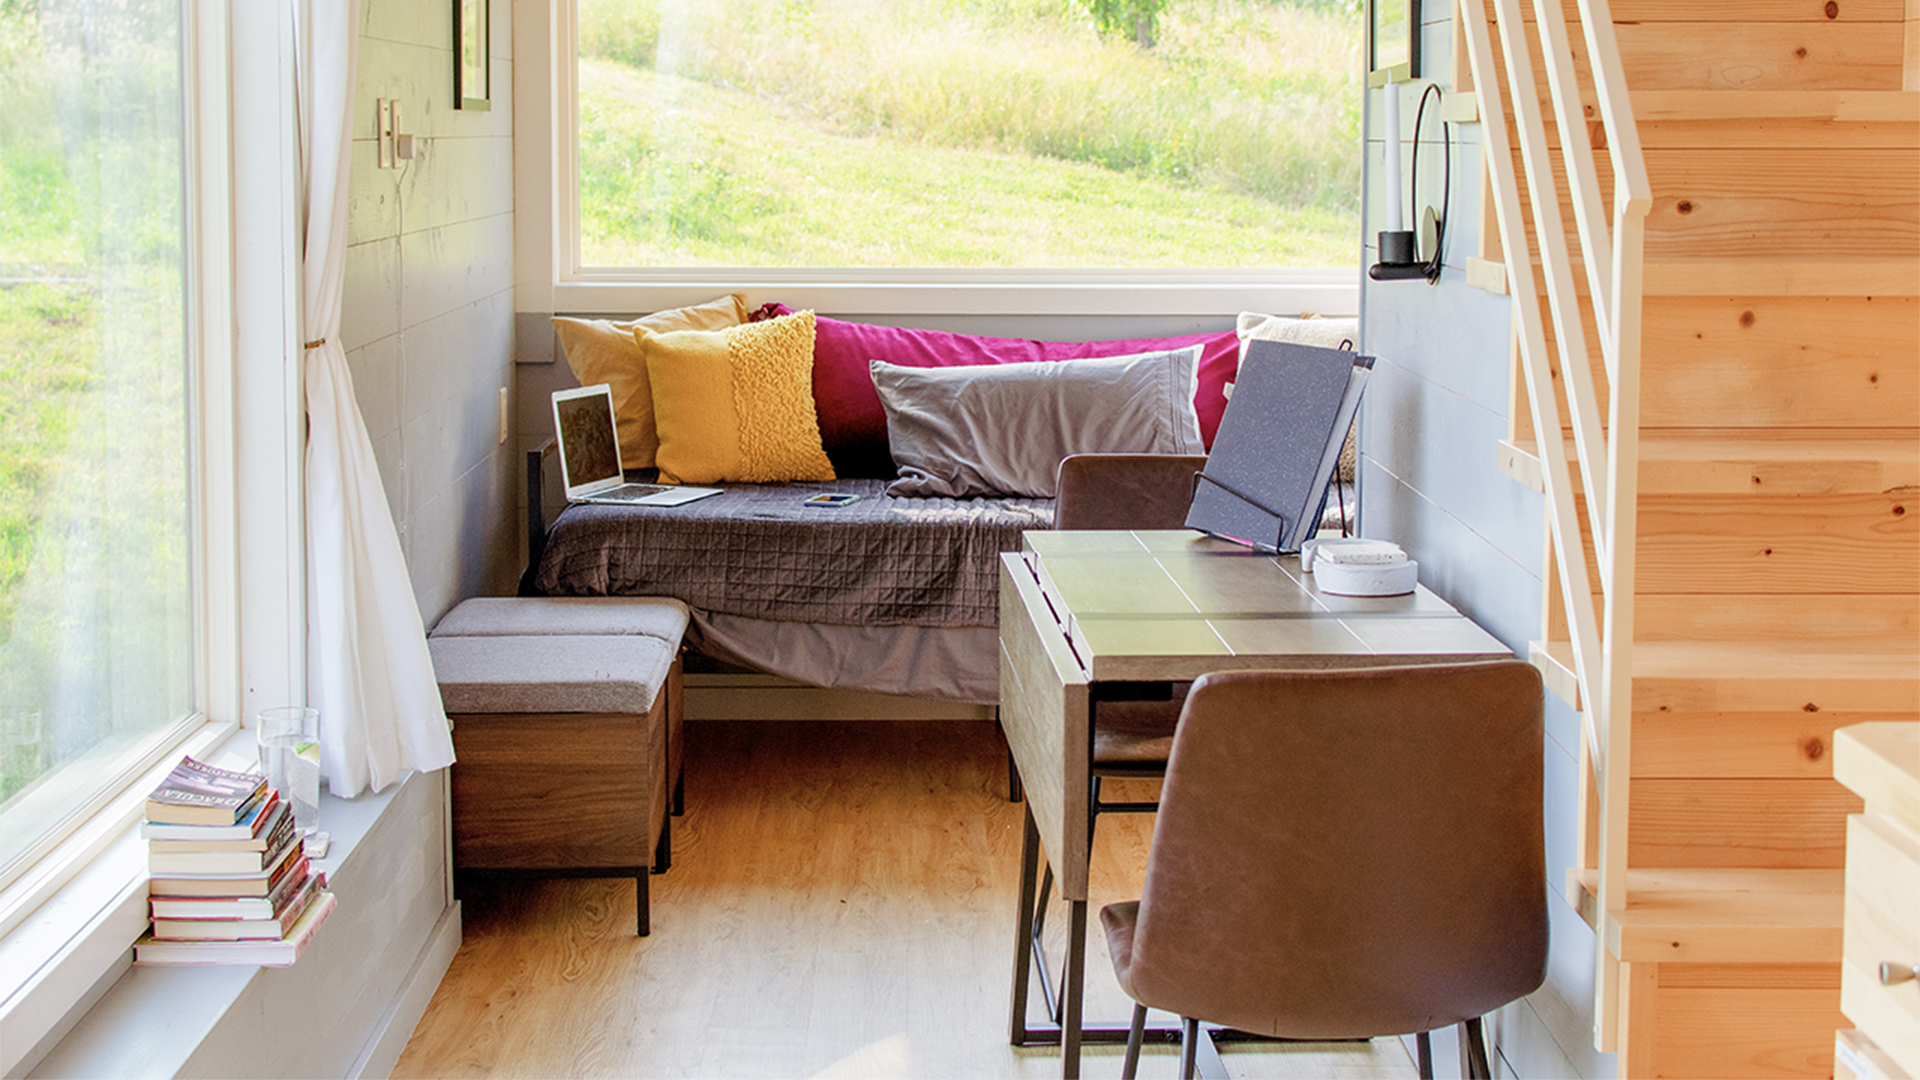 Cosy snug in a sunlit room in a tiny home.